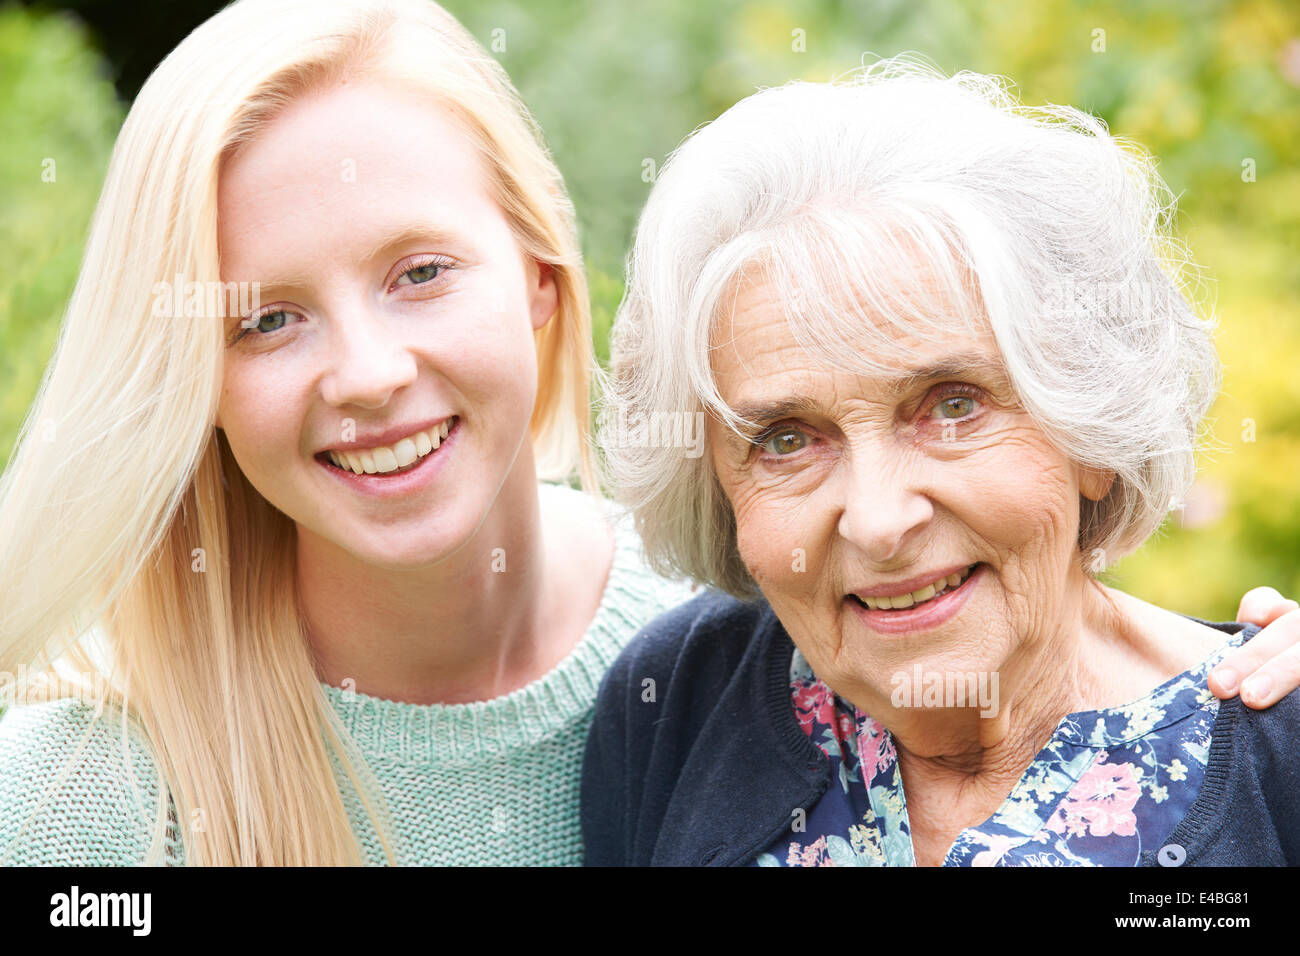 Outdoor Portrait Of Grandmother And Granddaughter Stock Photo